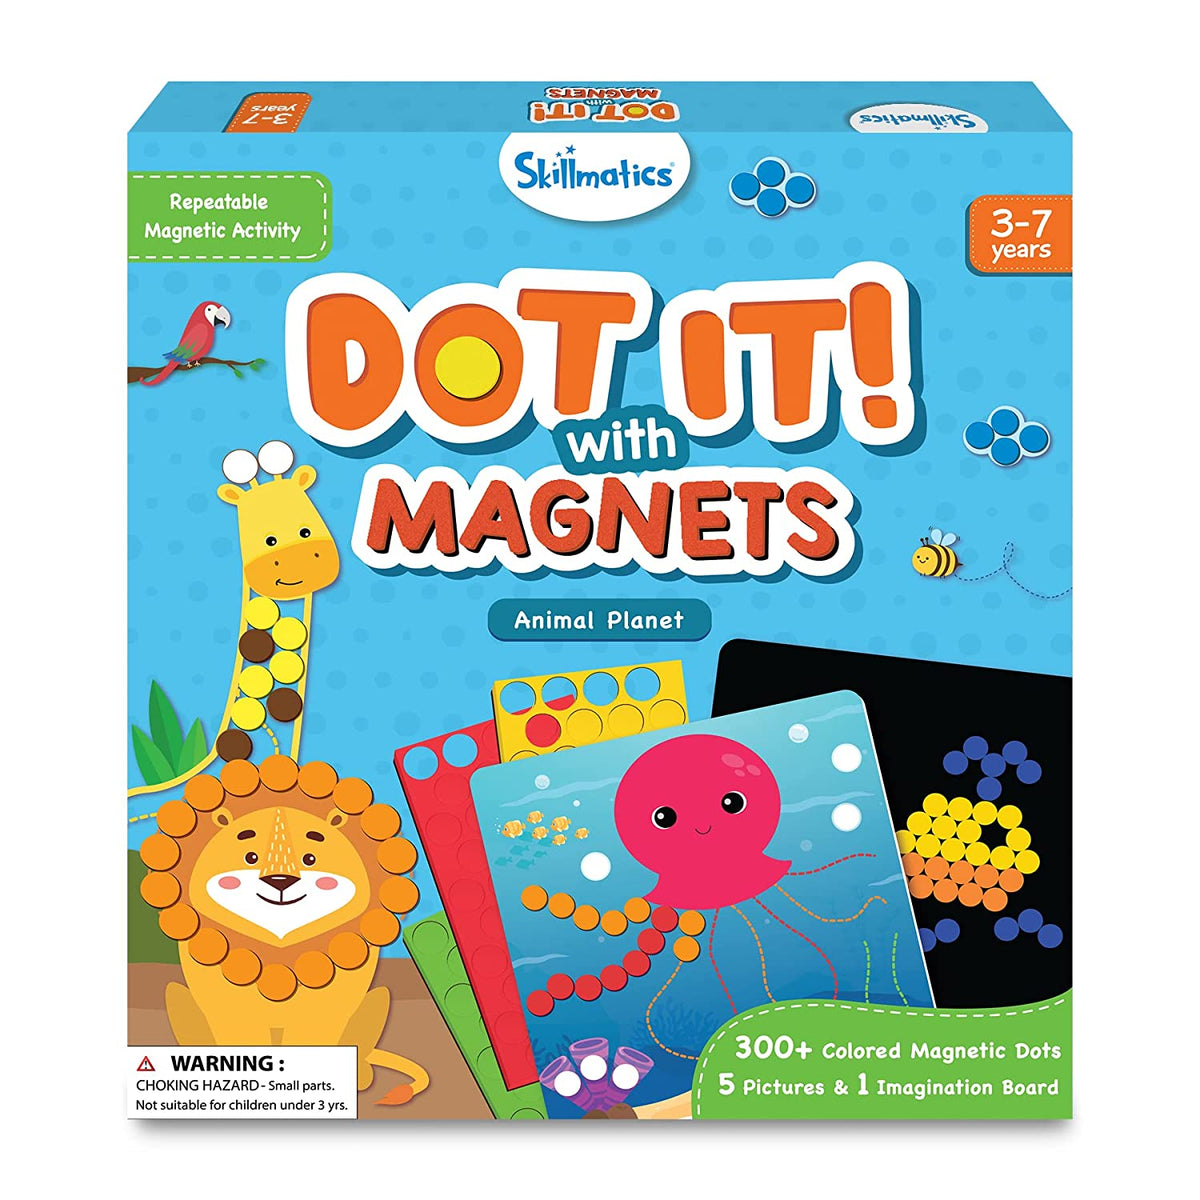 Skillmatics Dot It with Magnets - Animals Planet DIY Art Activity Gift Kit for Ages 3-7 Years